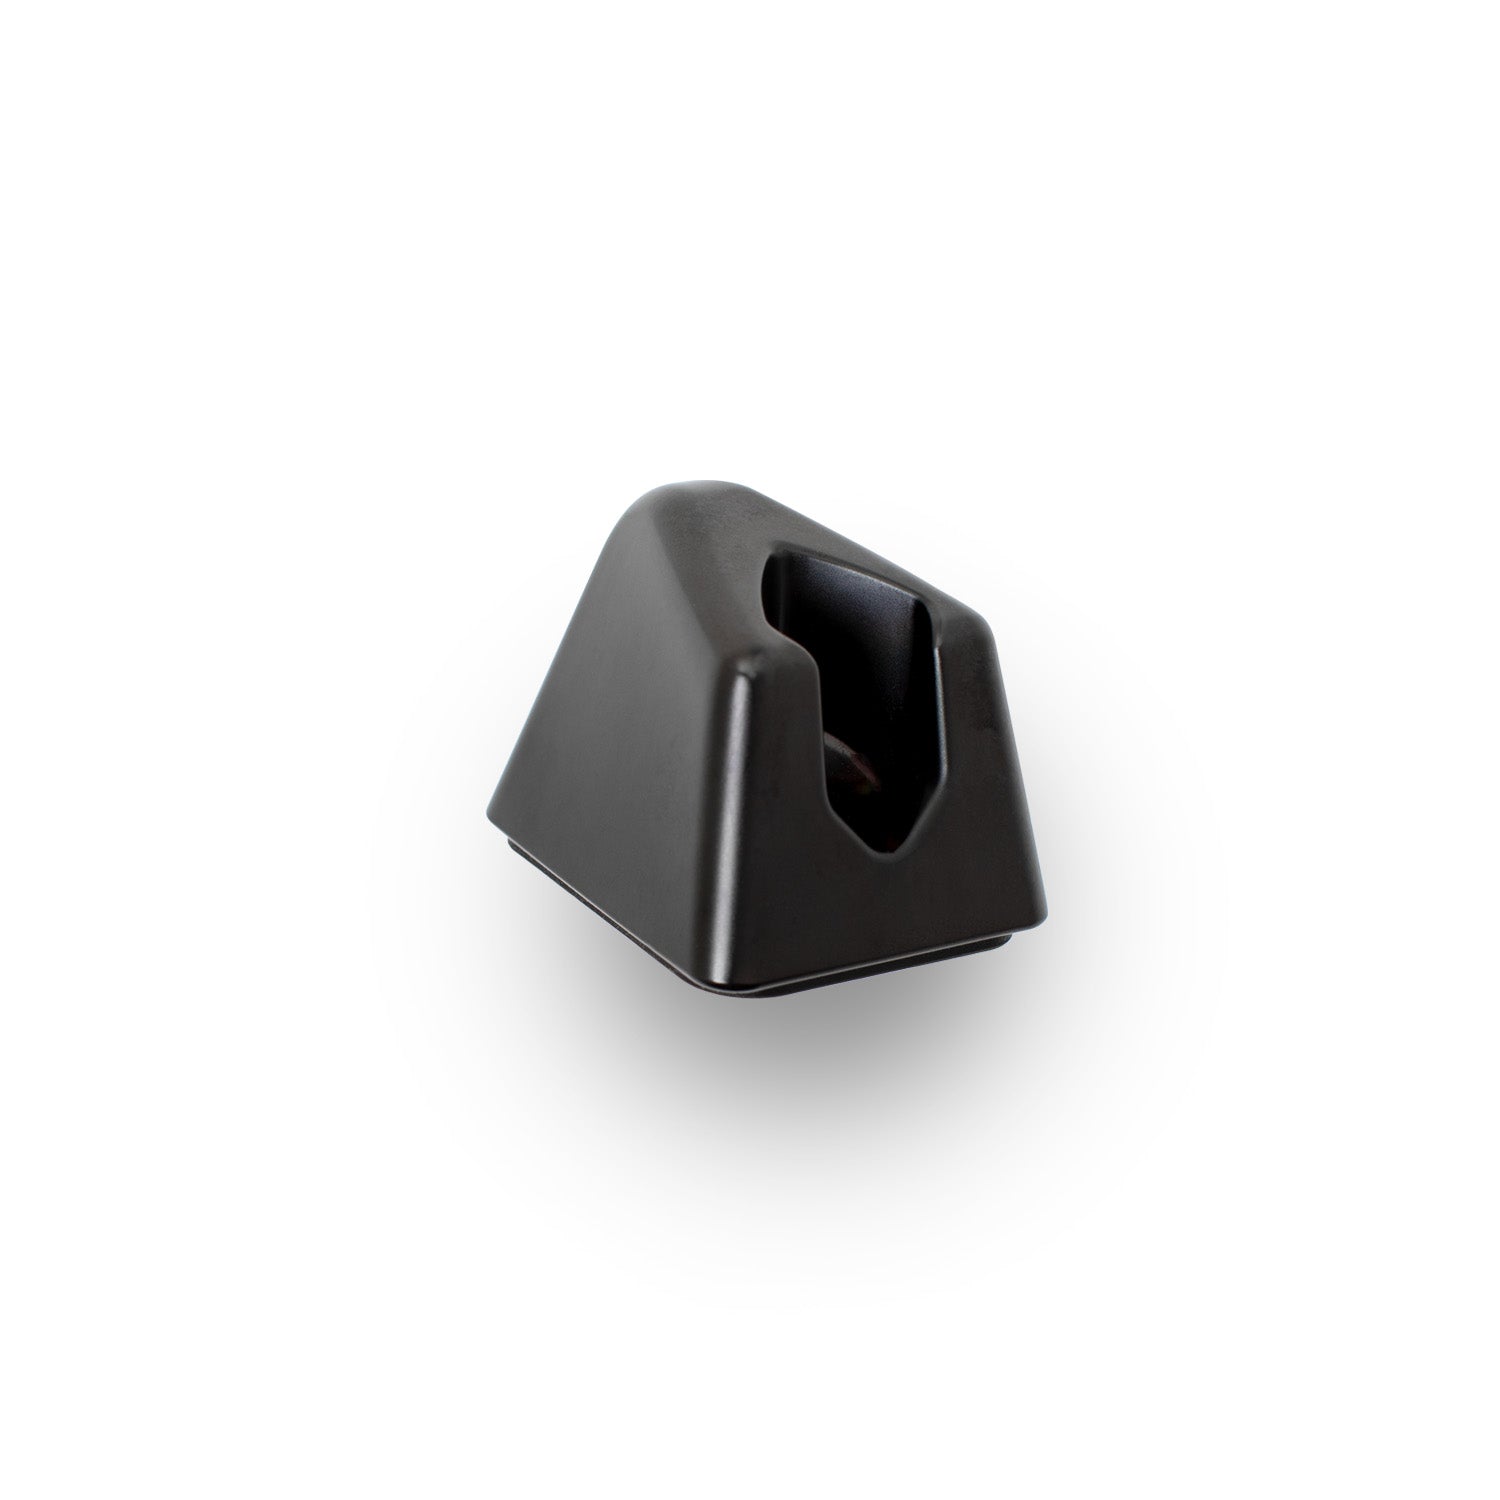 A Leaf Shave brand Leaf razor stand in the finish called Black